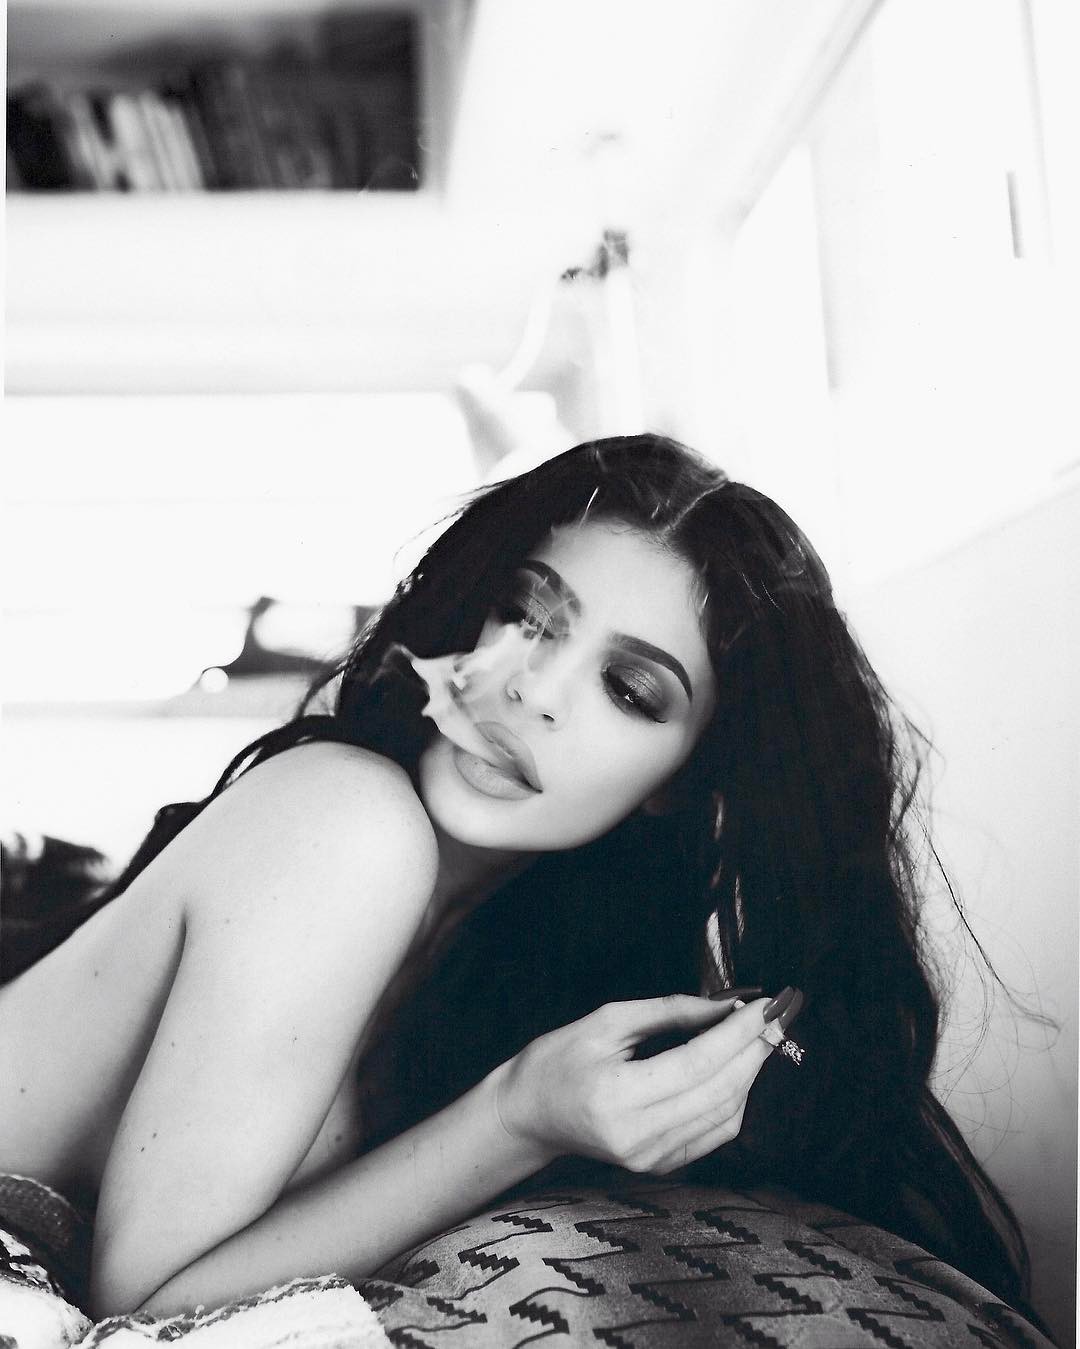 Kylie Jenner Stirs Controversy In Topless Photo While Puffing Cigarette